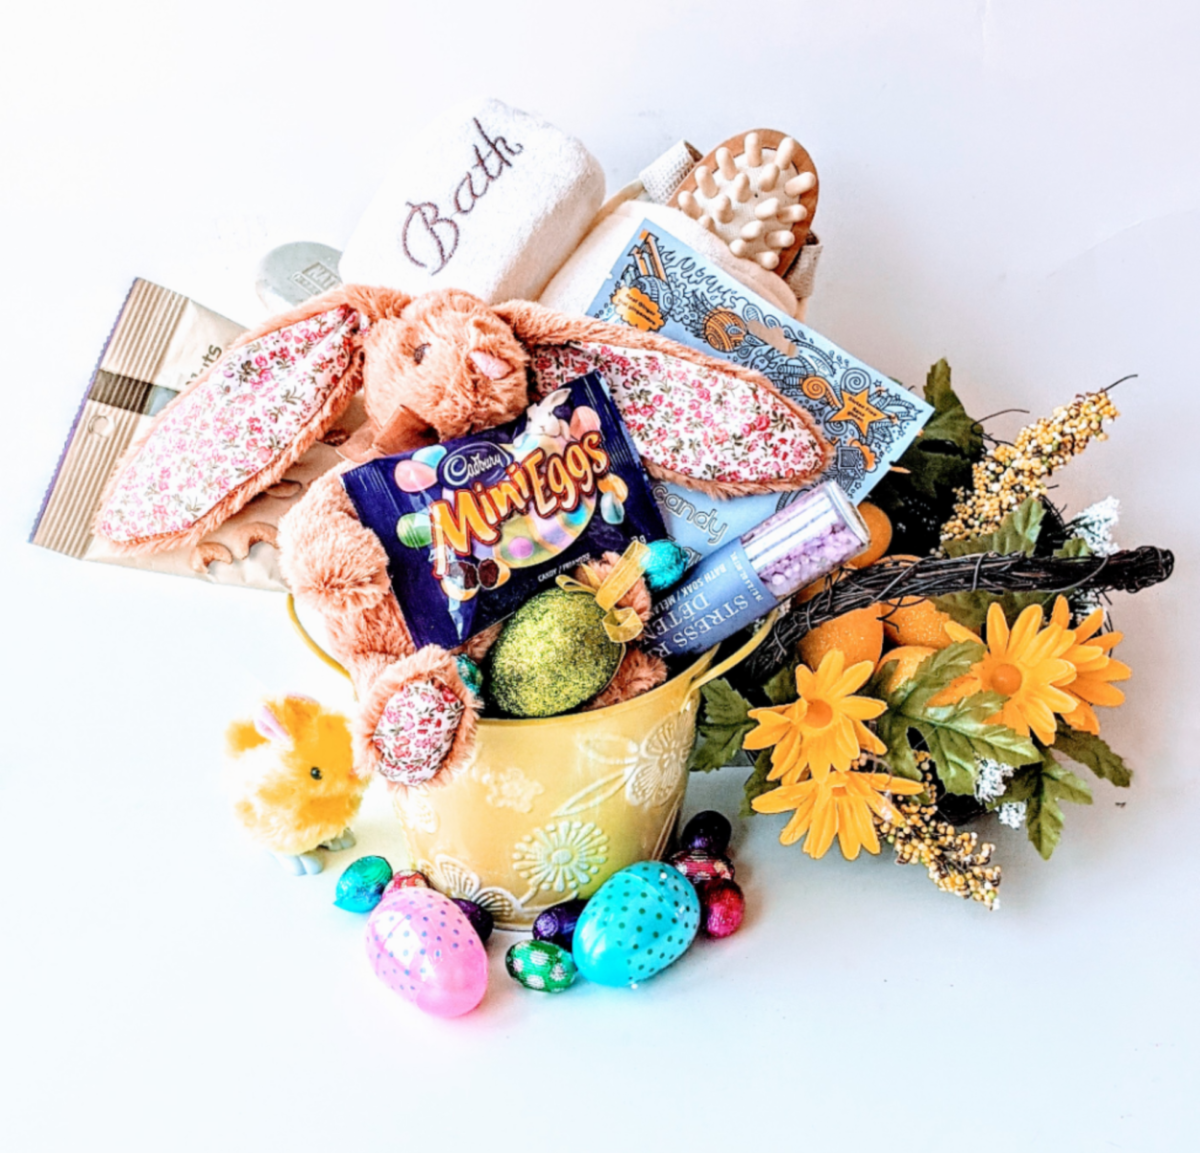 Easter gift baskets for kids and the family